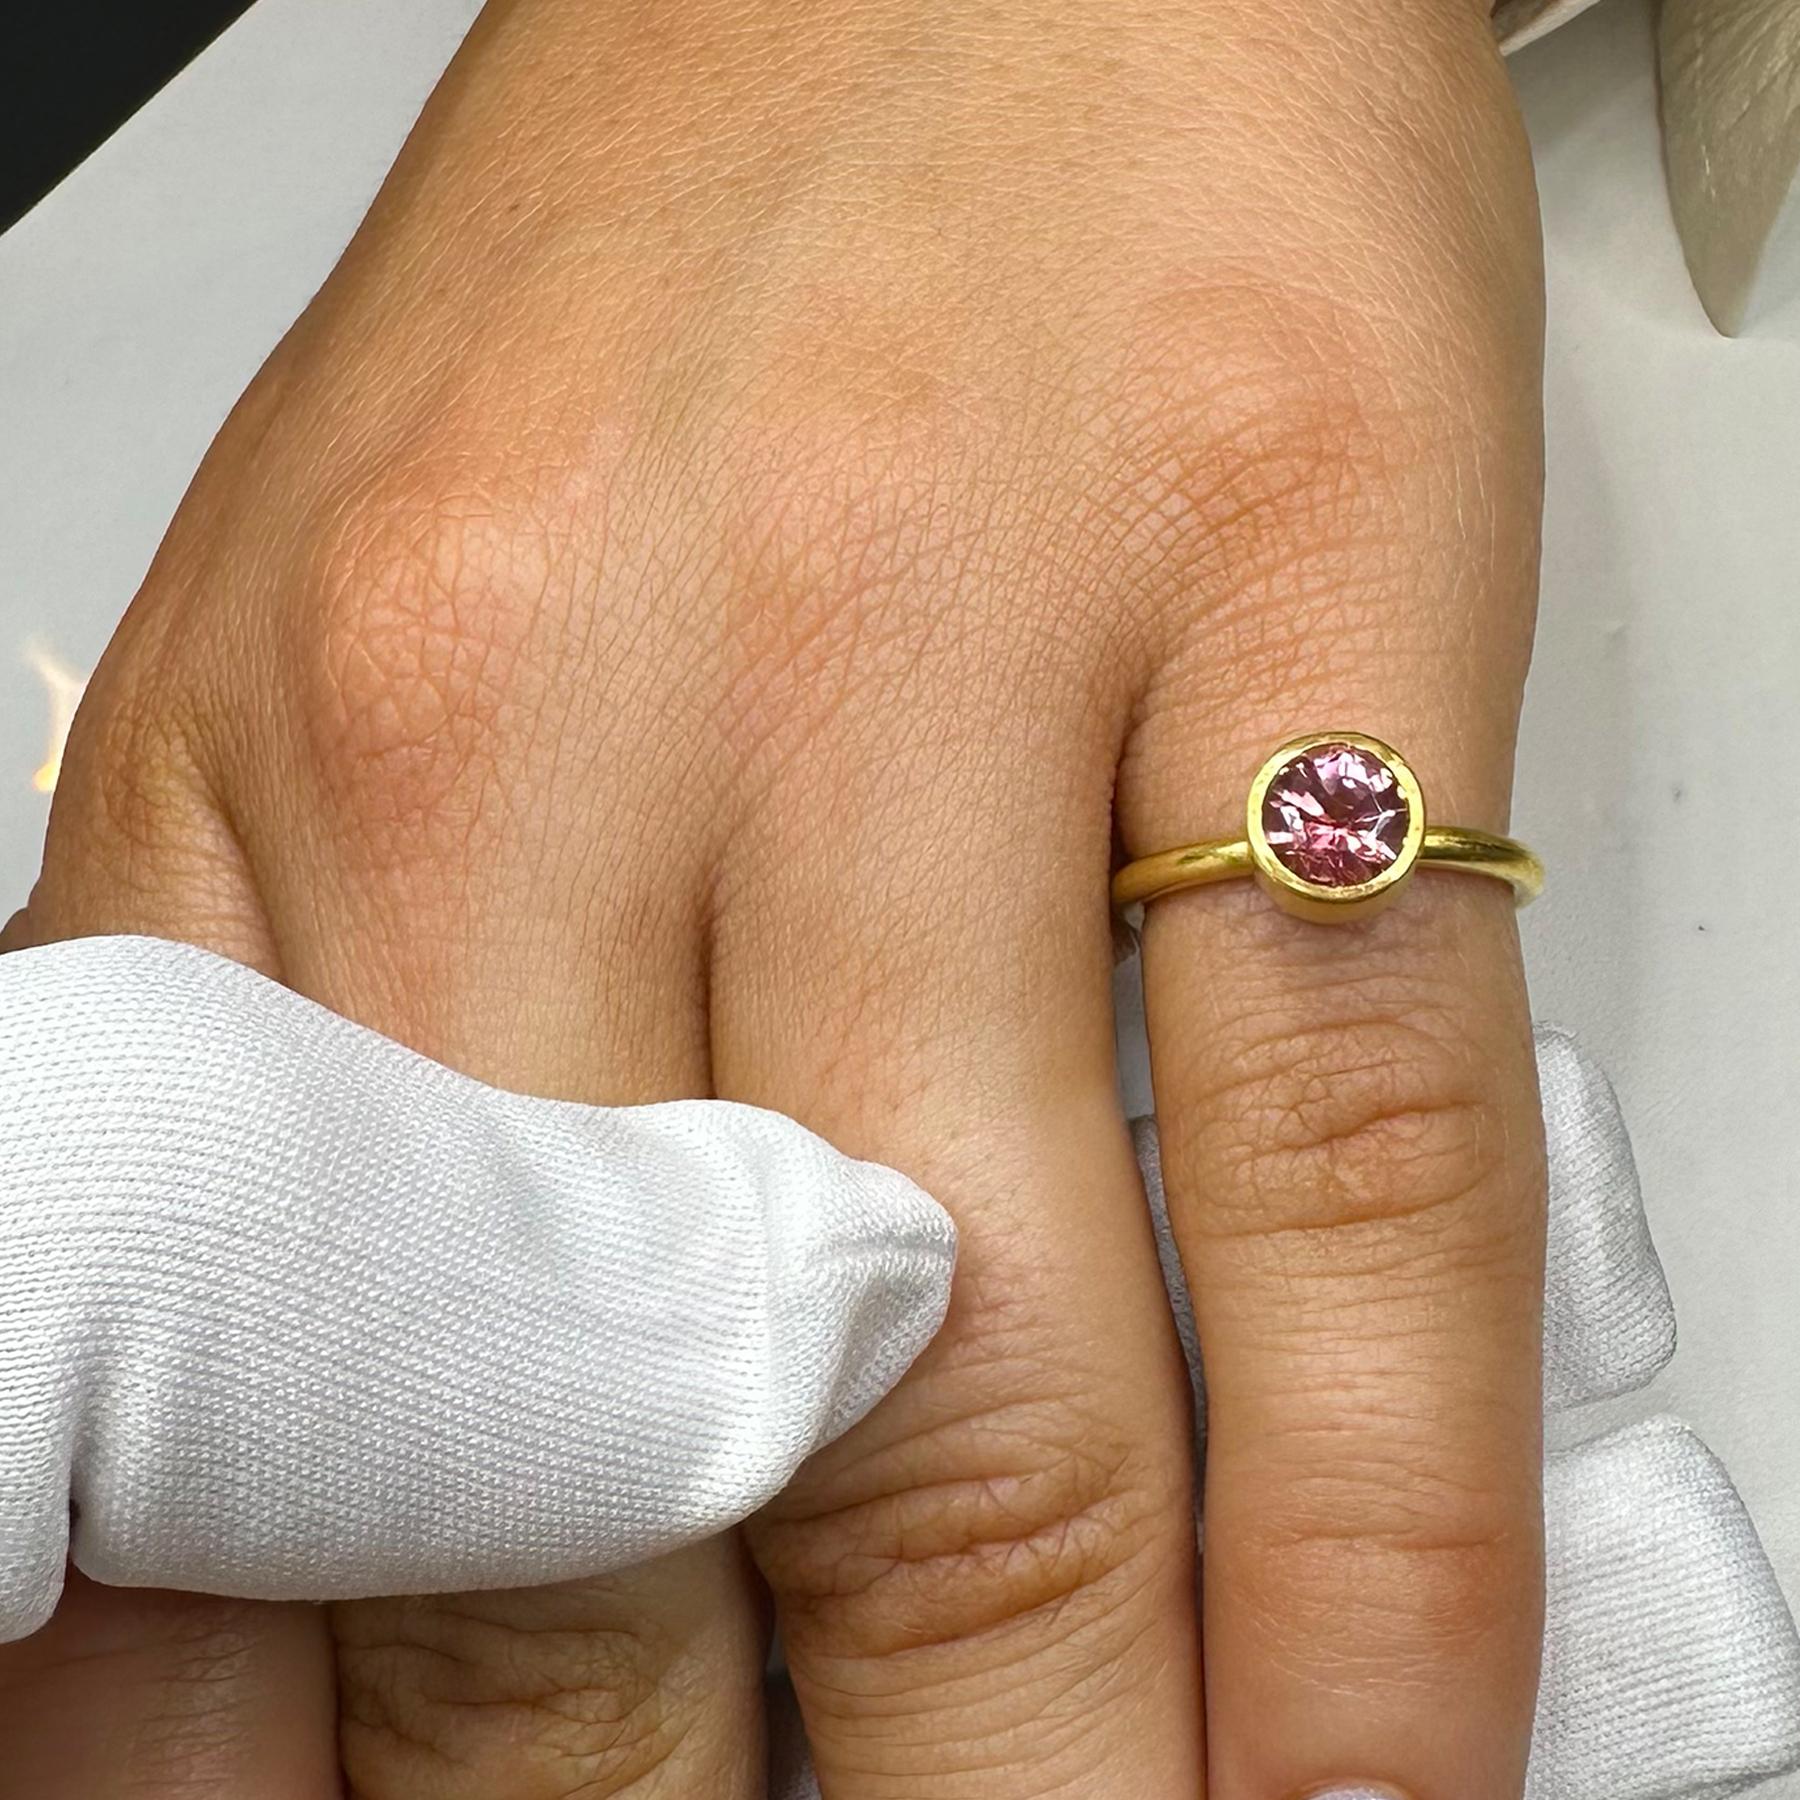 PHILIPPE SPENCER 1.87 Ct. Pink Tourmaline in 22K and 20K Gold Solitaire Ring In New Condition For Sale In Key West, FL